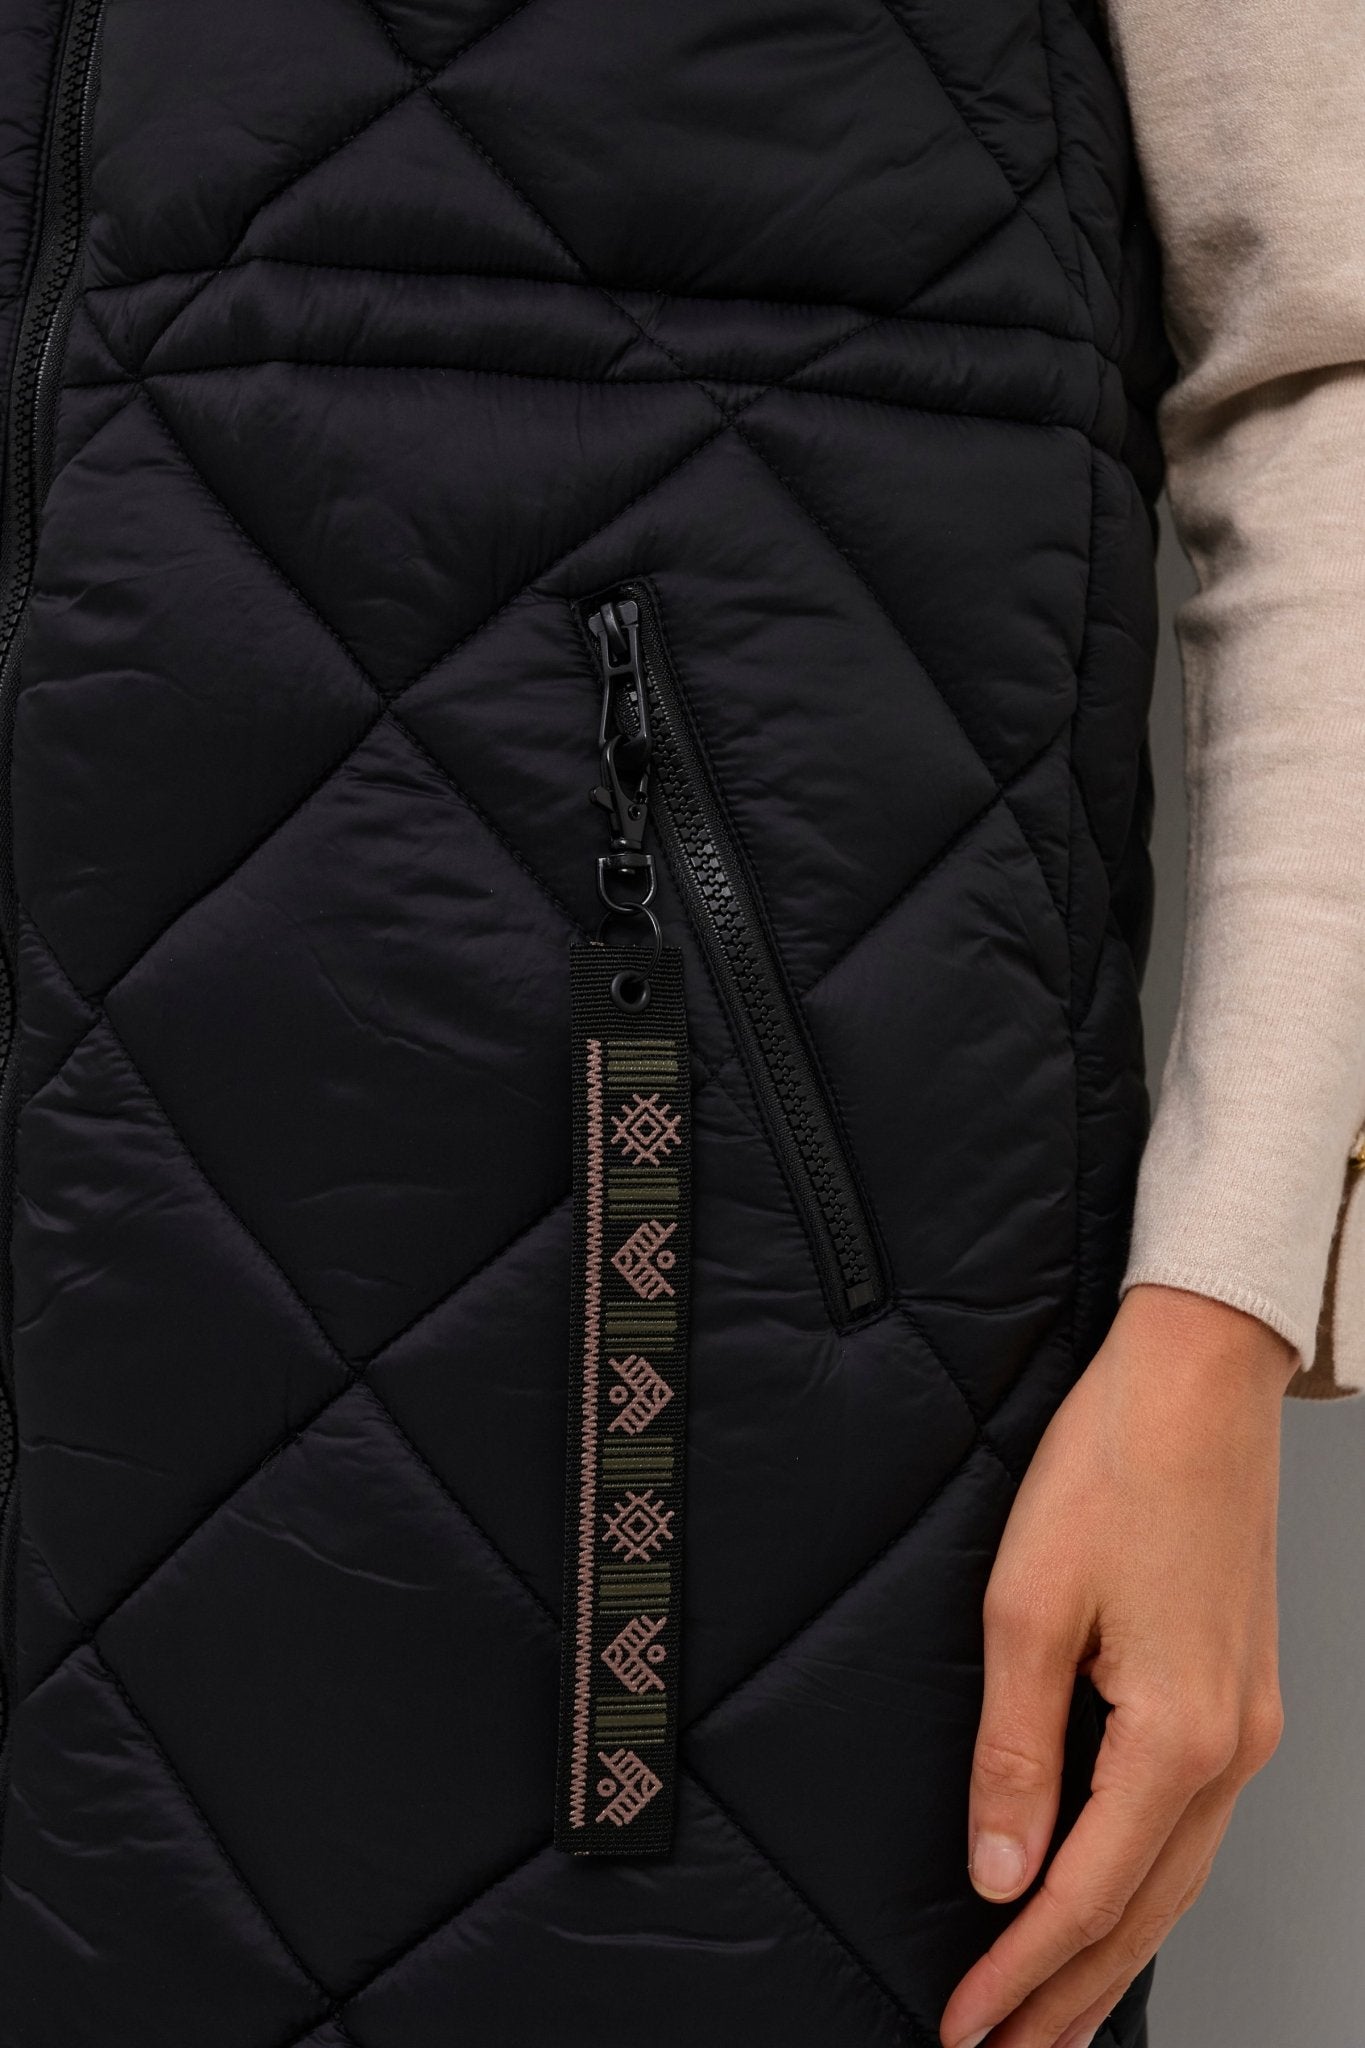 Gaiagro long quilted vest - pitch black - Blue Sky Clothing & Lingerie